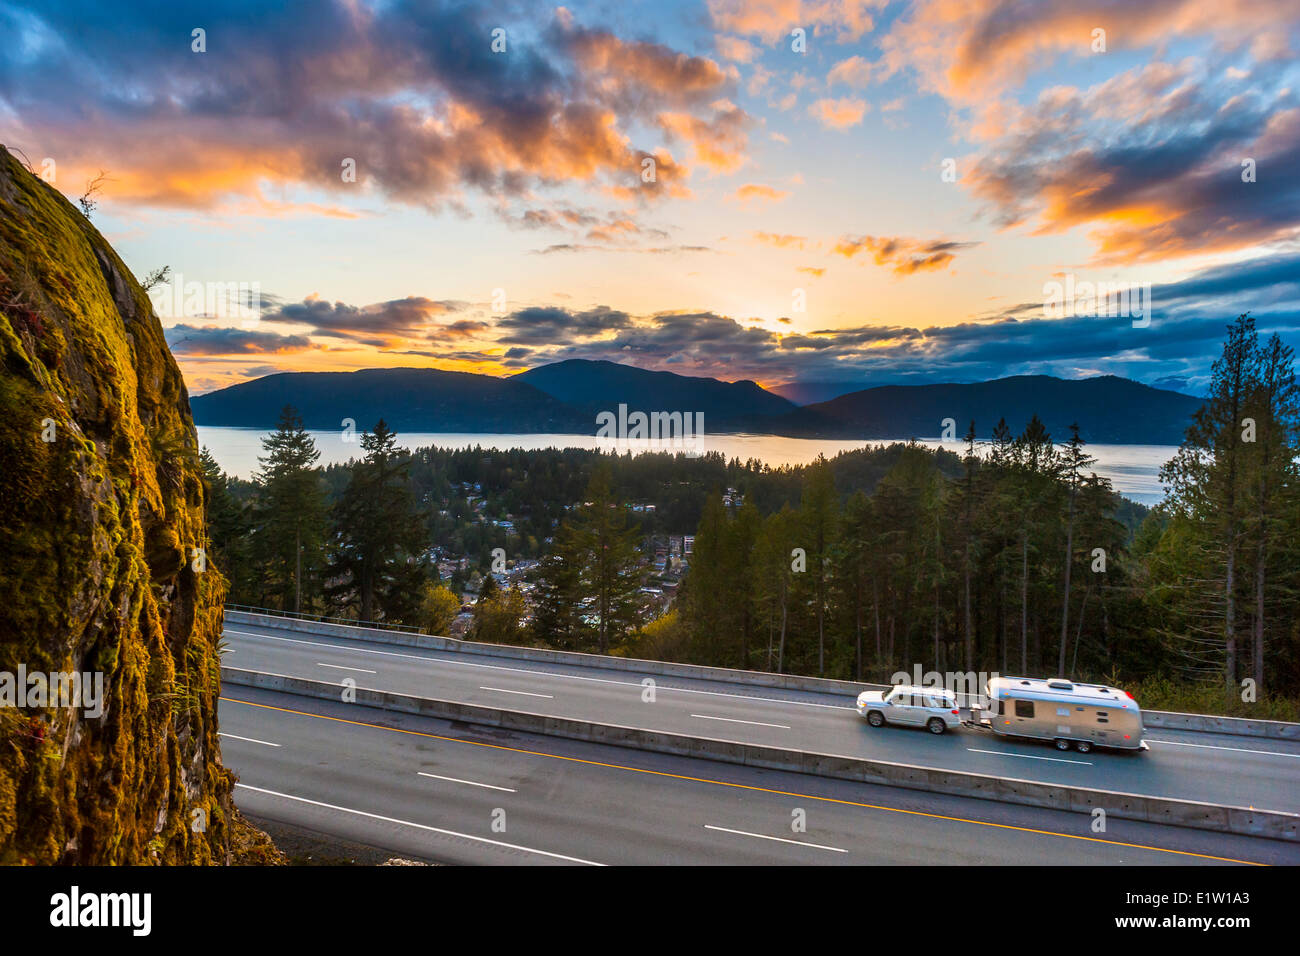 Sea to sky highway at sunset. Stock Photo